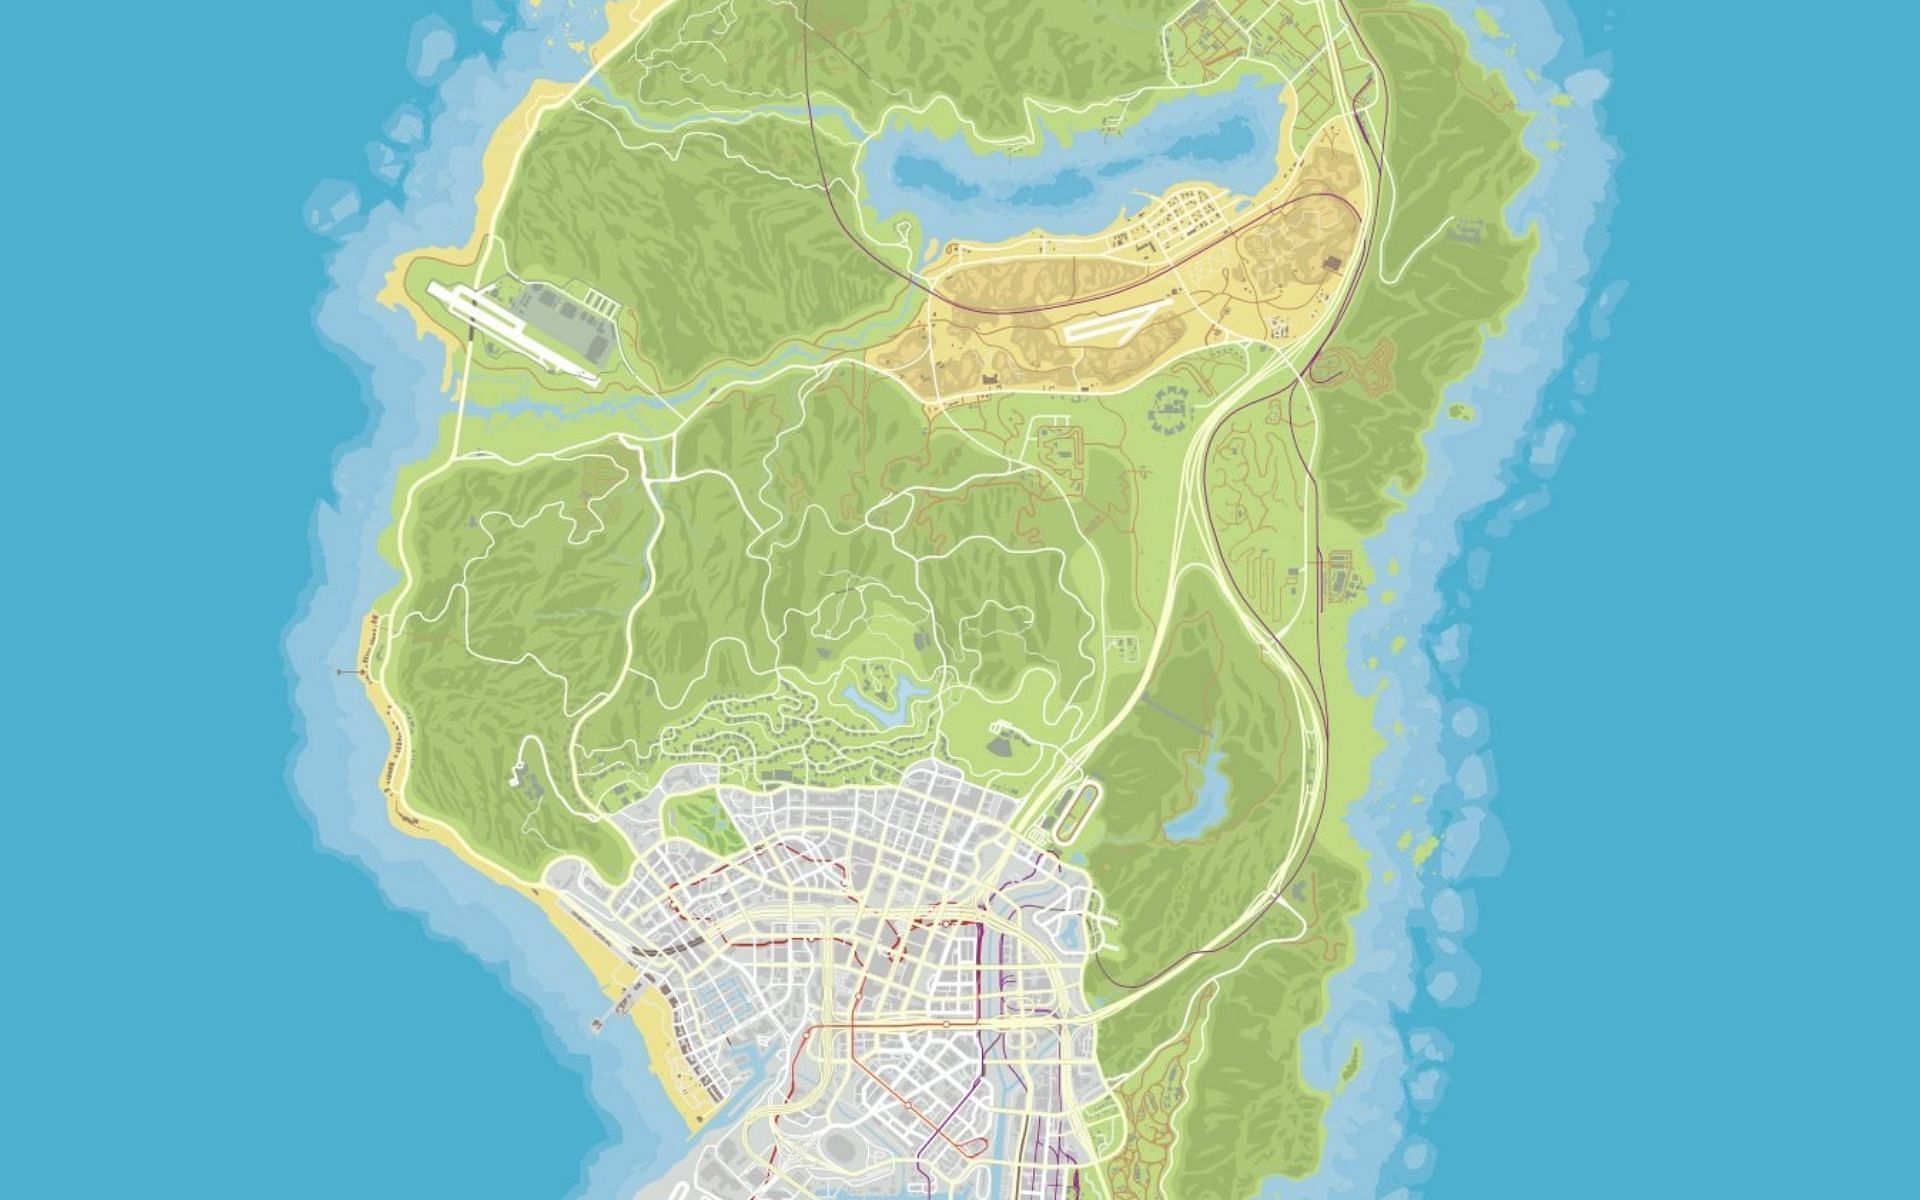 Interactive map for all GTA Online collectibles